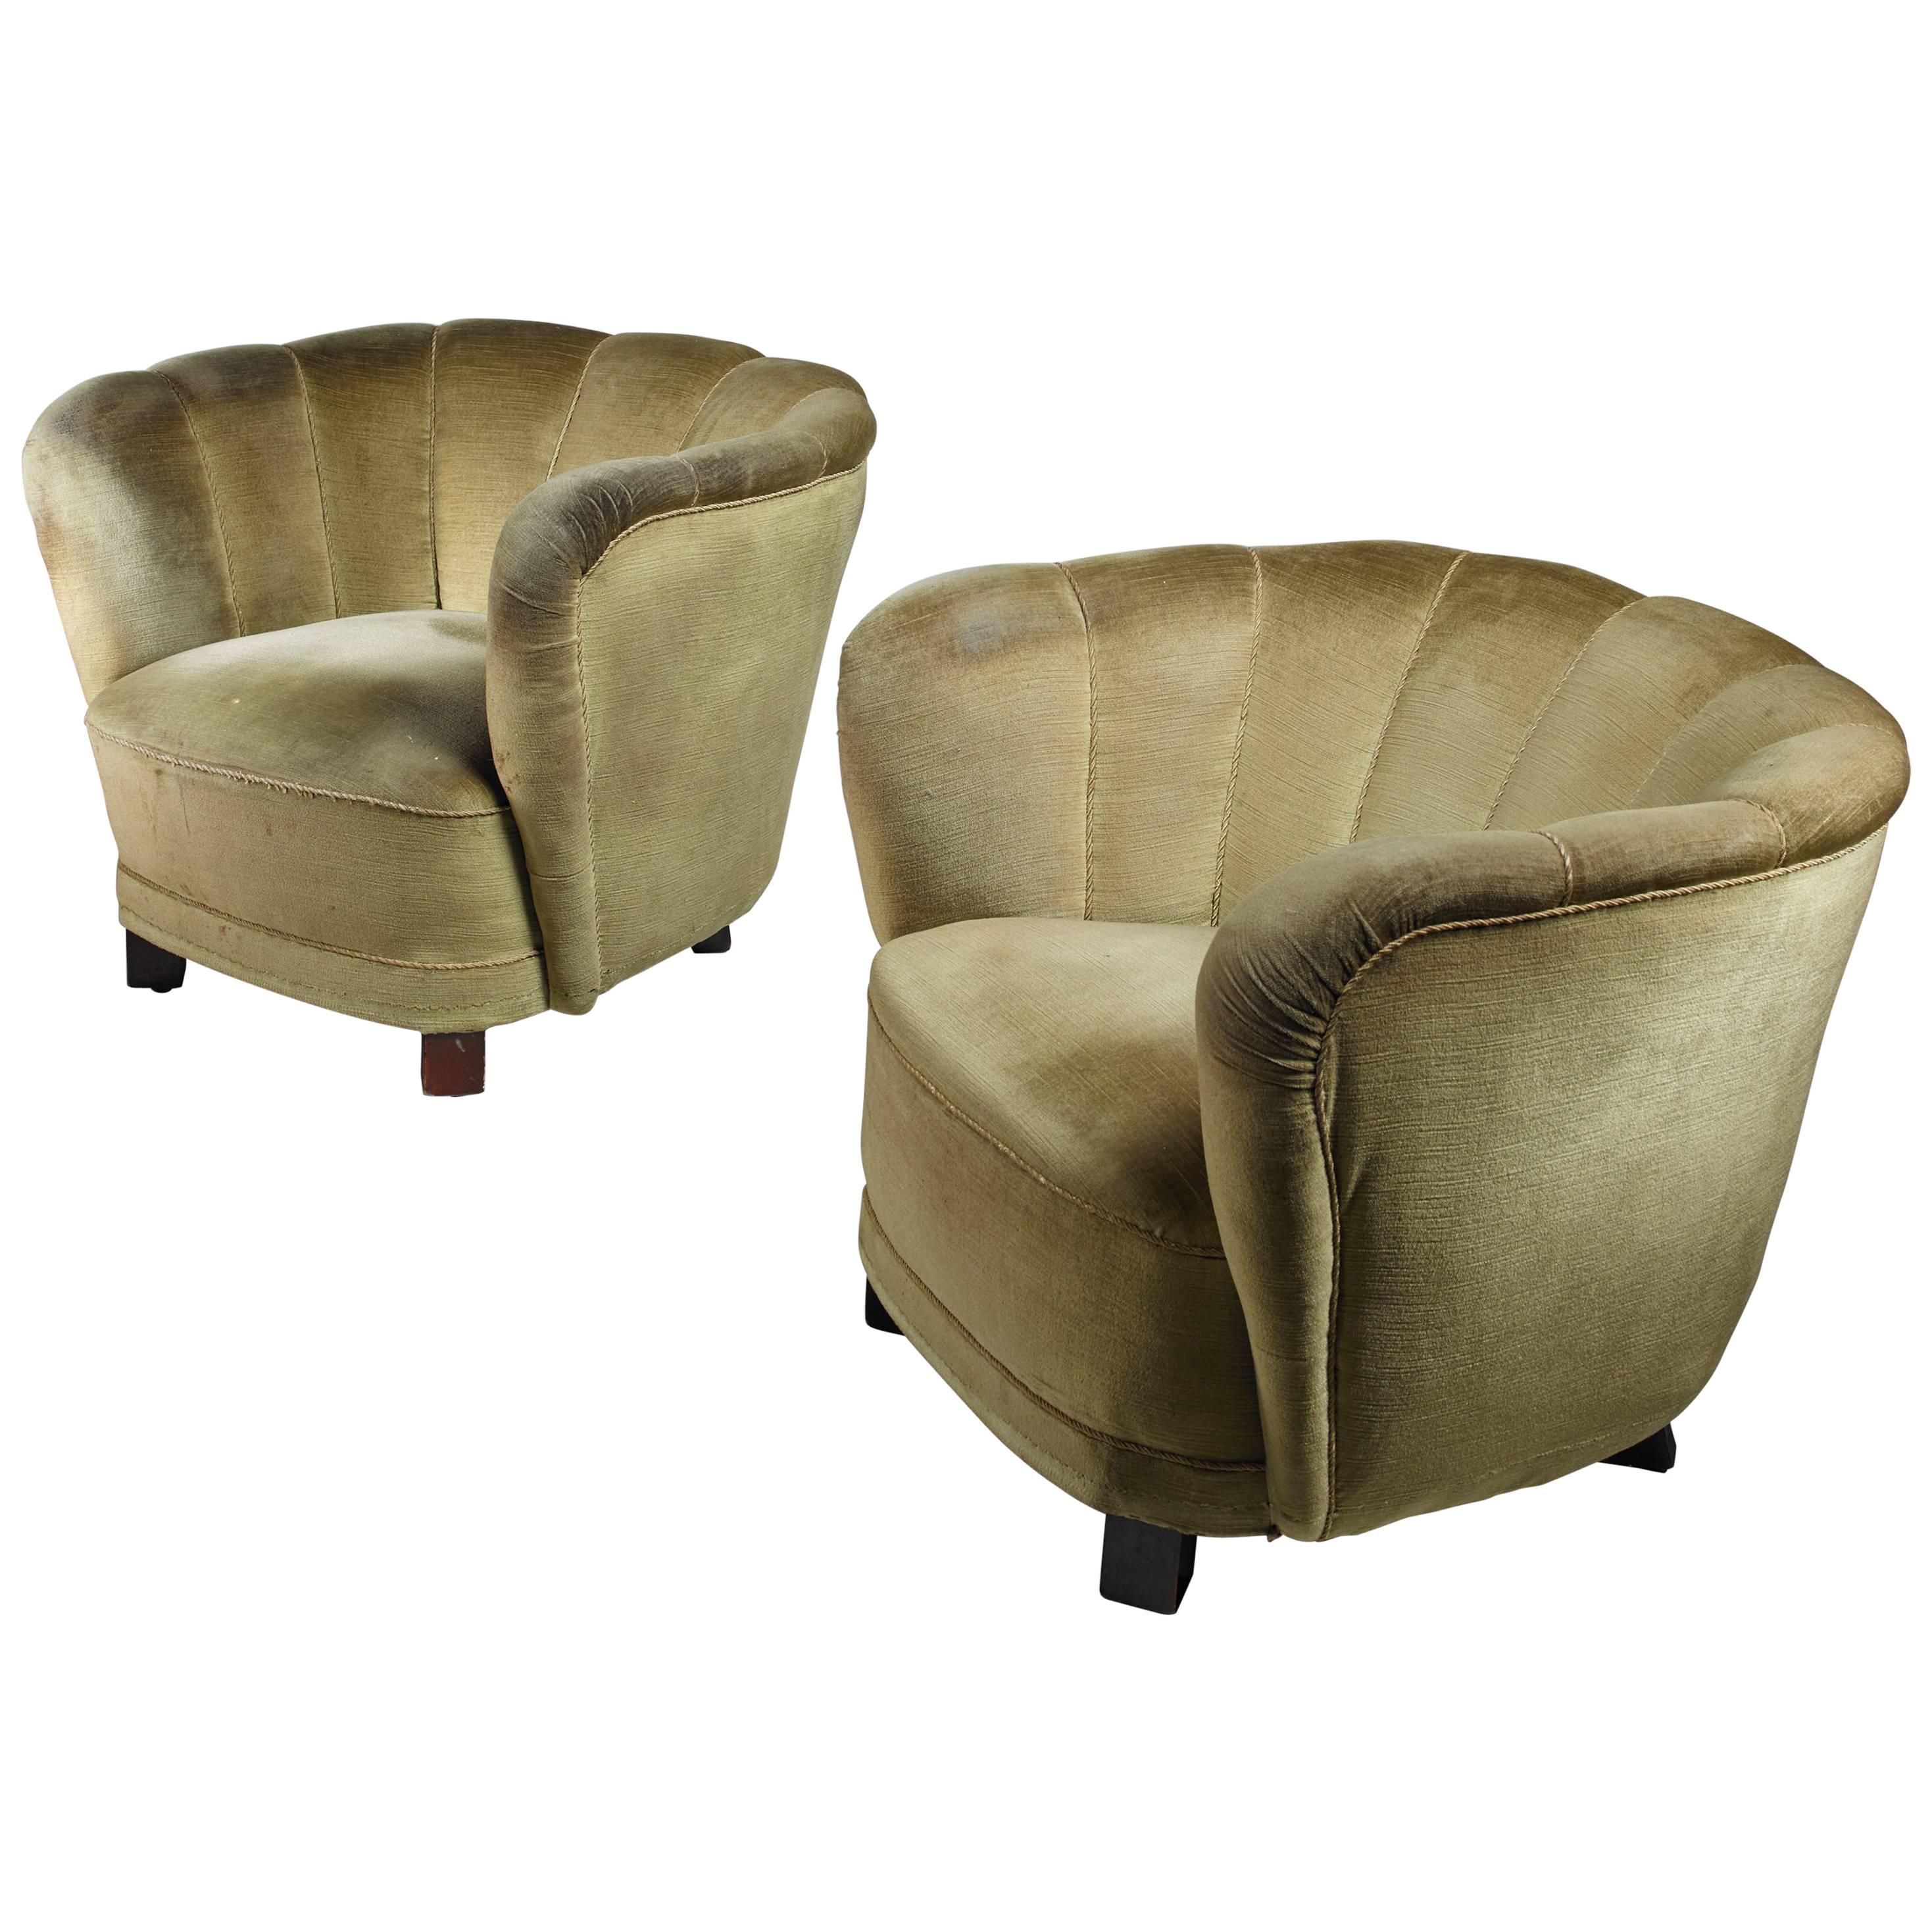 Pair of Club Chairs with Green Velour Upholstery, Denmark, 1940s For Sale